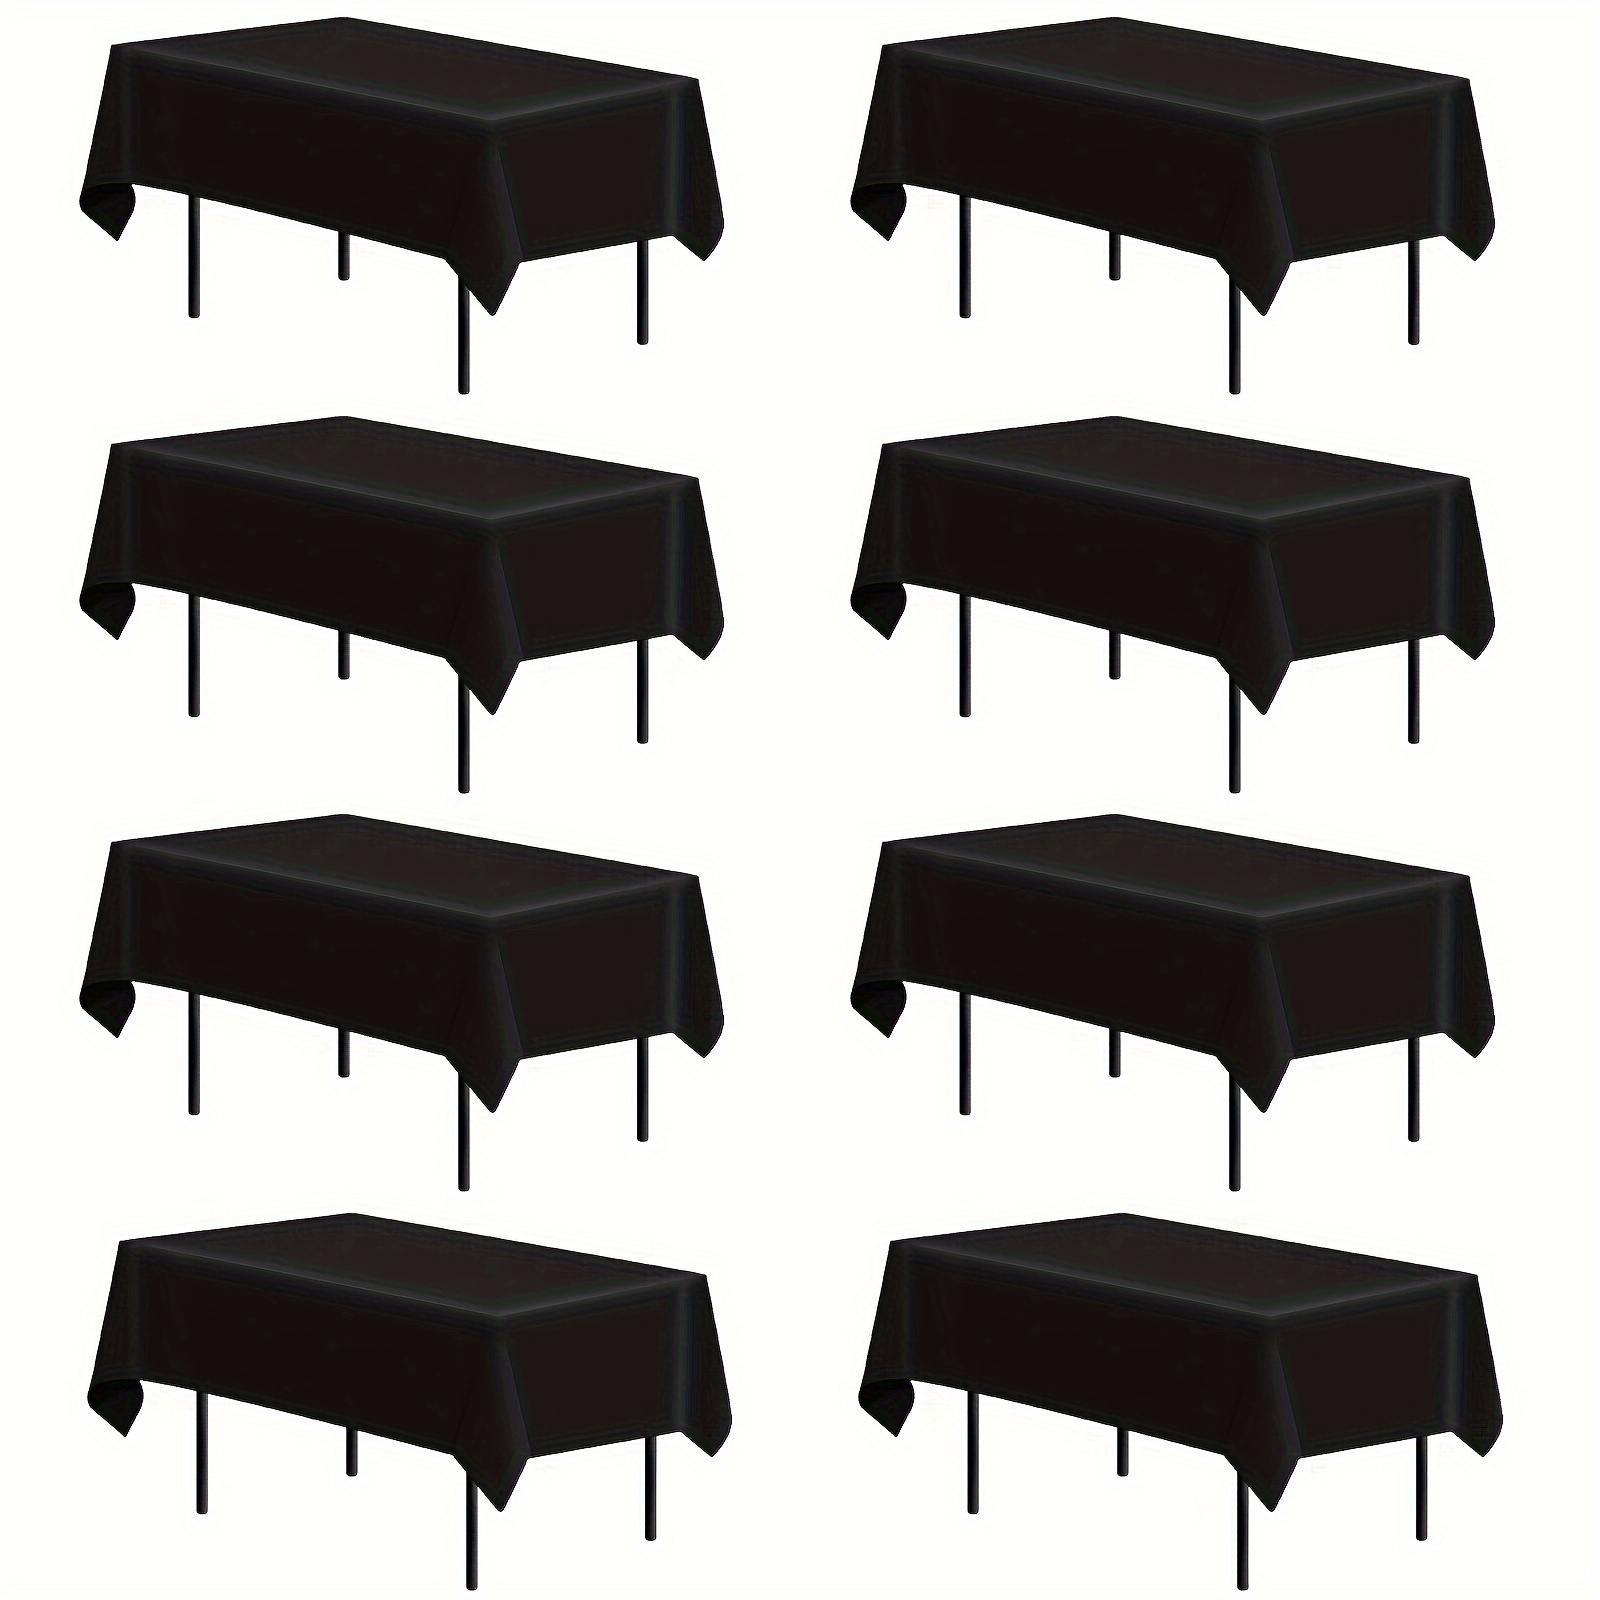 

8pcs, Black Tablecloth, Rectangle Table Cloth, Stain And Wrinkle Resistant Washable Polyester Table Cover For Dining Table, Wedding, Buffet Parties And Camping Decor